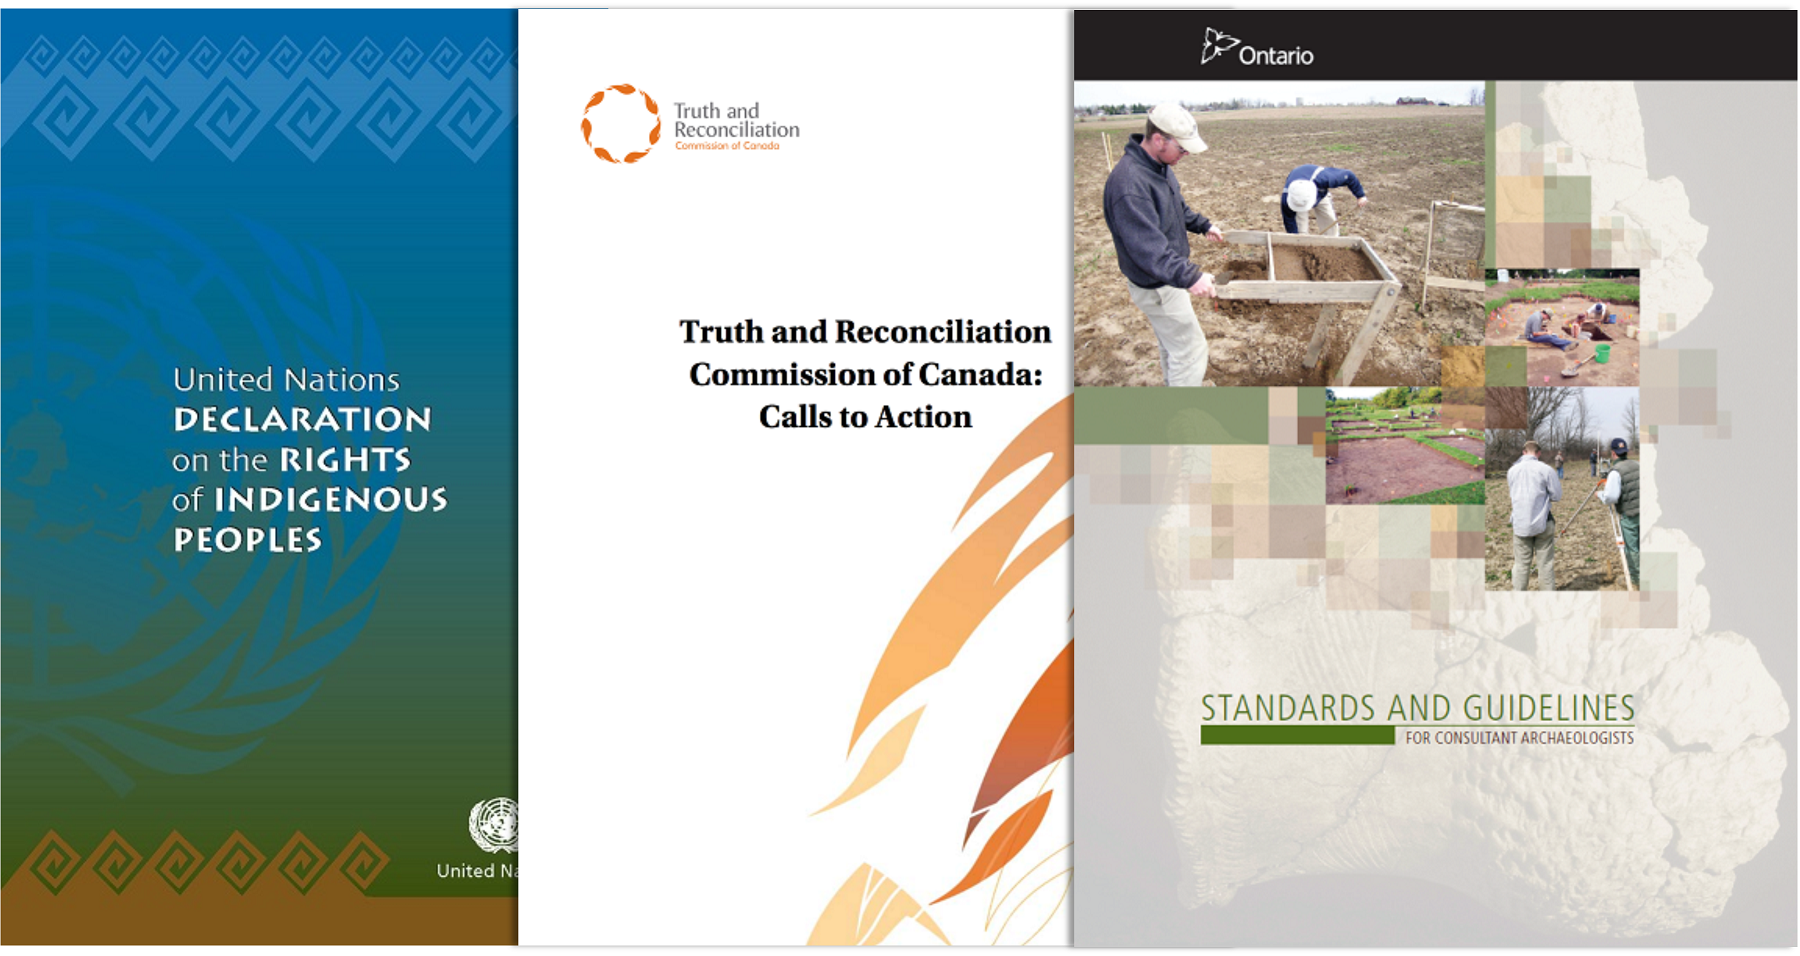 A collage showing the United Declaration of the Rights of Indigenous Peoples, the Truth and Reconciliation Commission of Canada's Calls to Action, and the Standards and Guidelines for Consultant Archaeologists